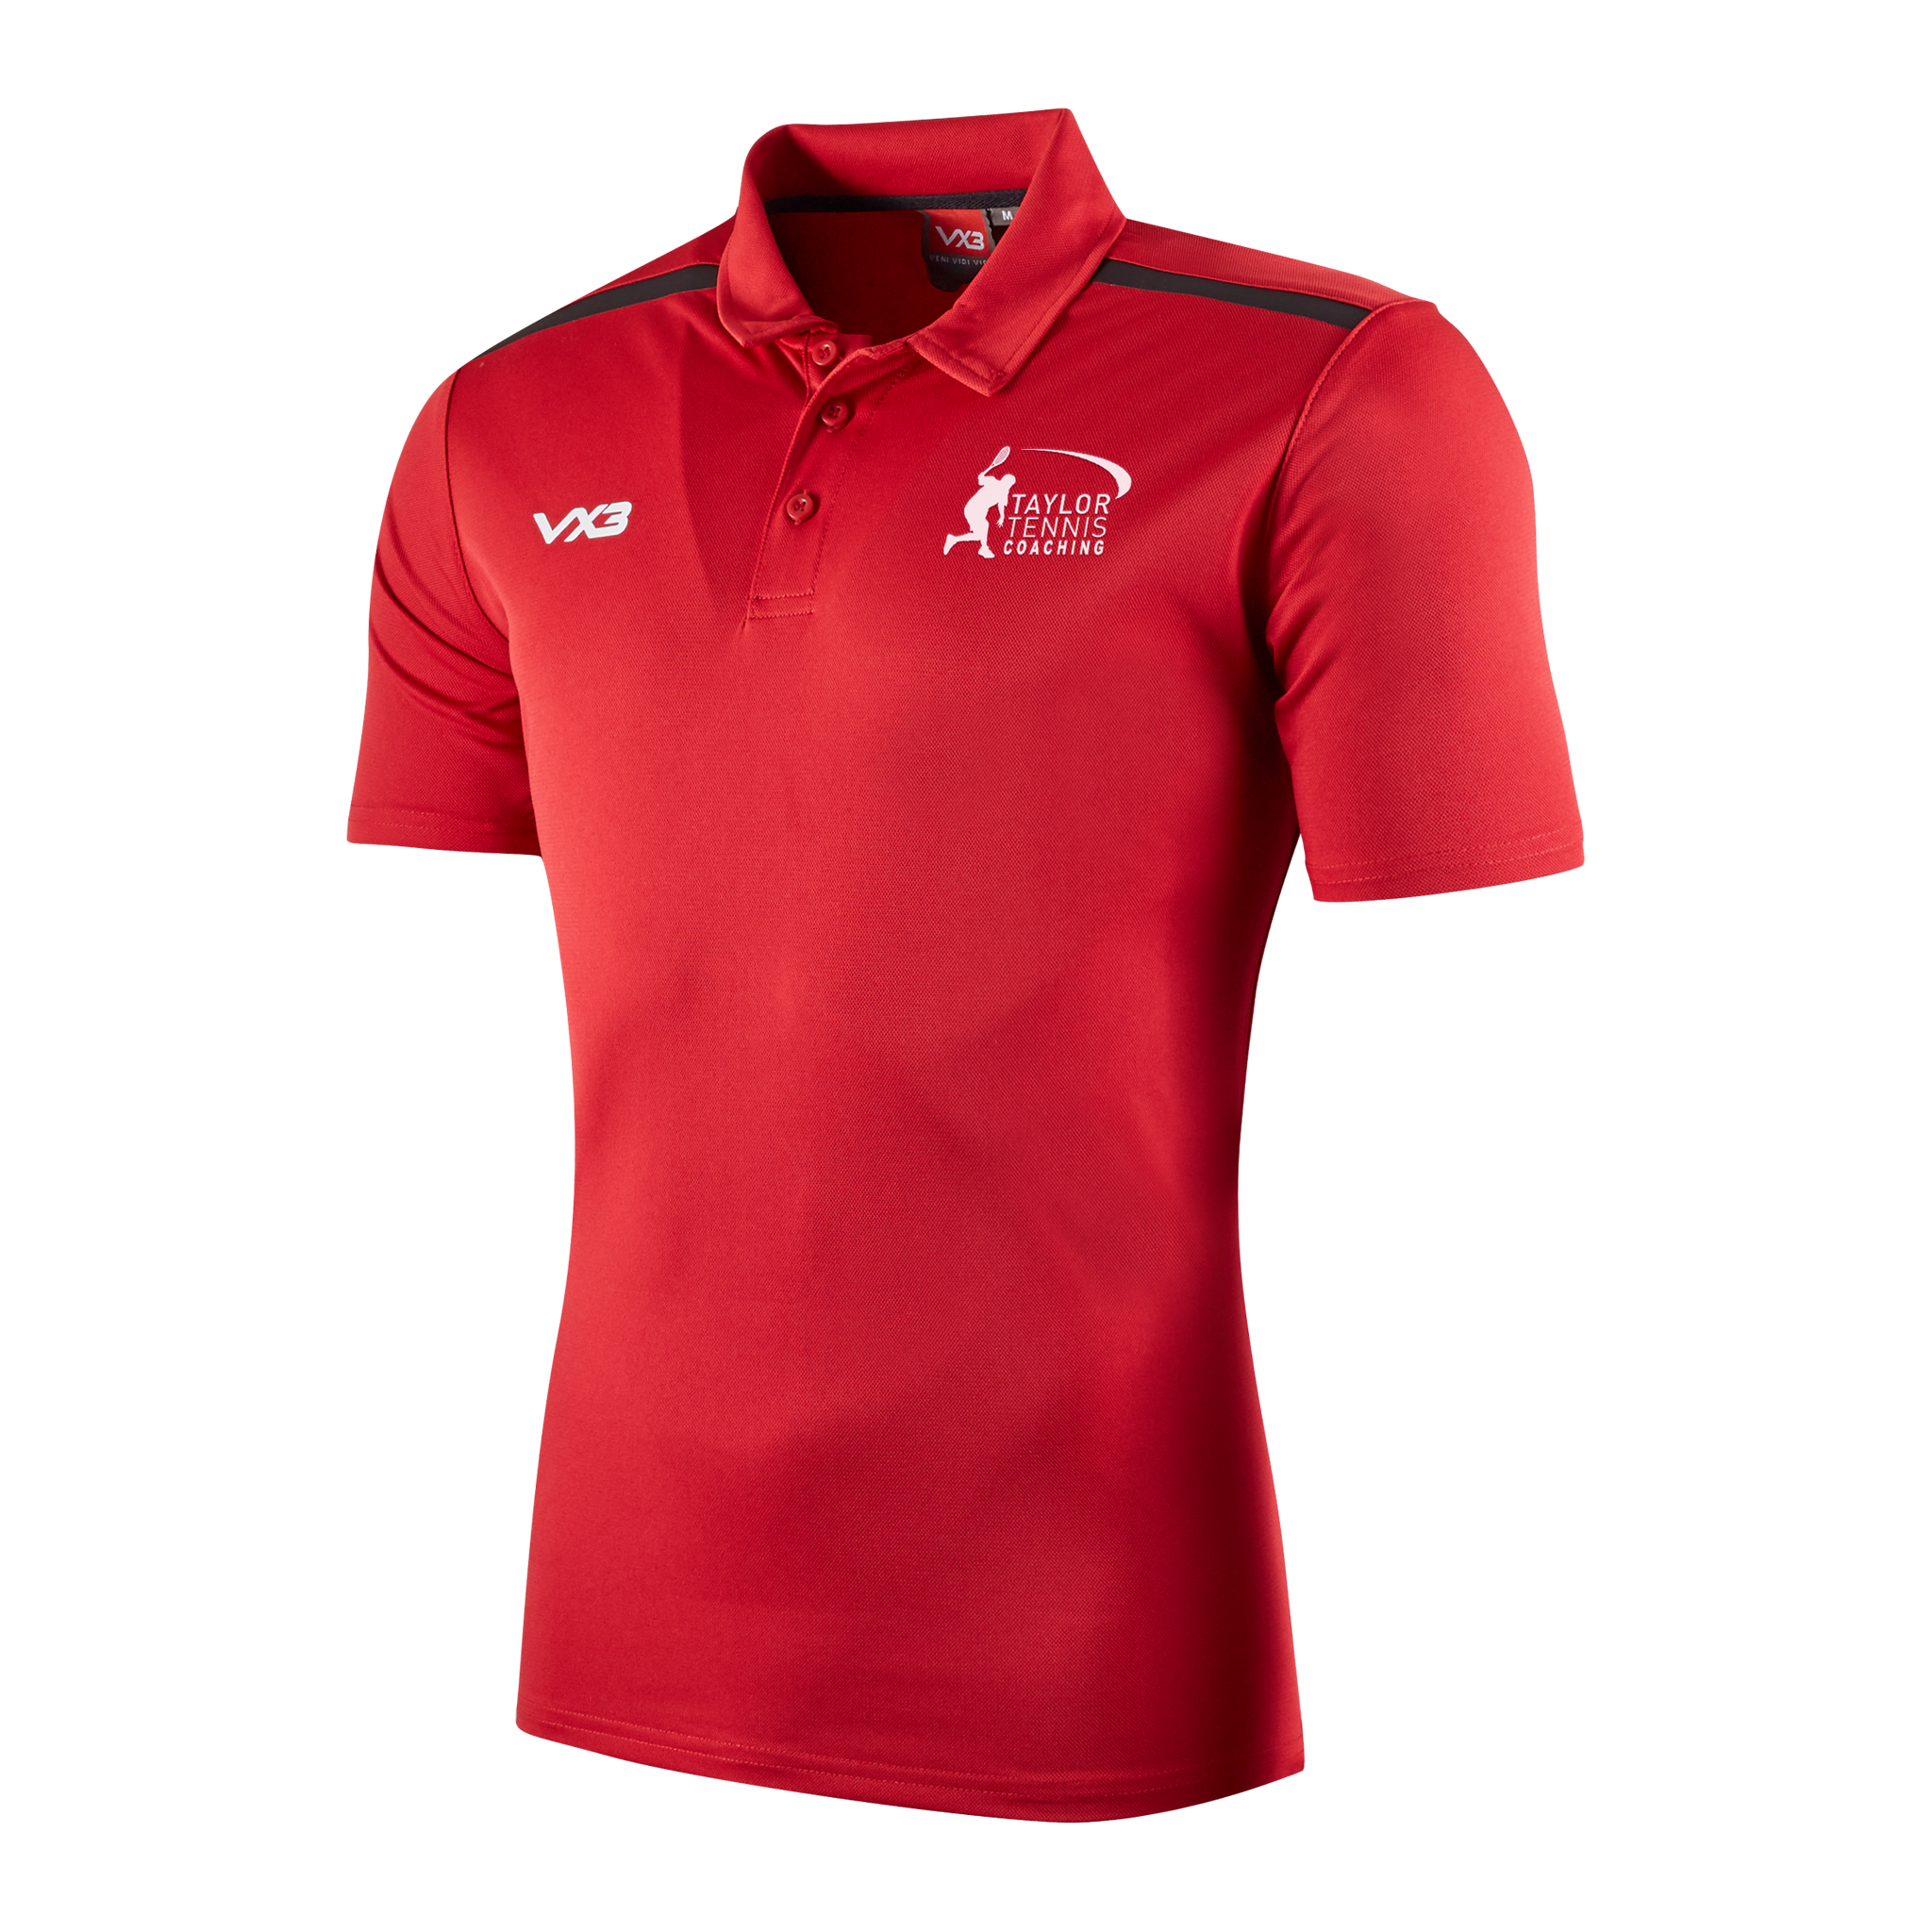 Taylor Tennis Coaching Fortis Youth Polo Red/Black